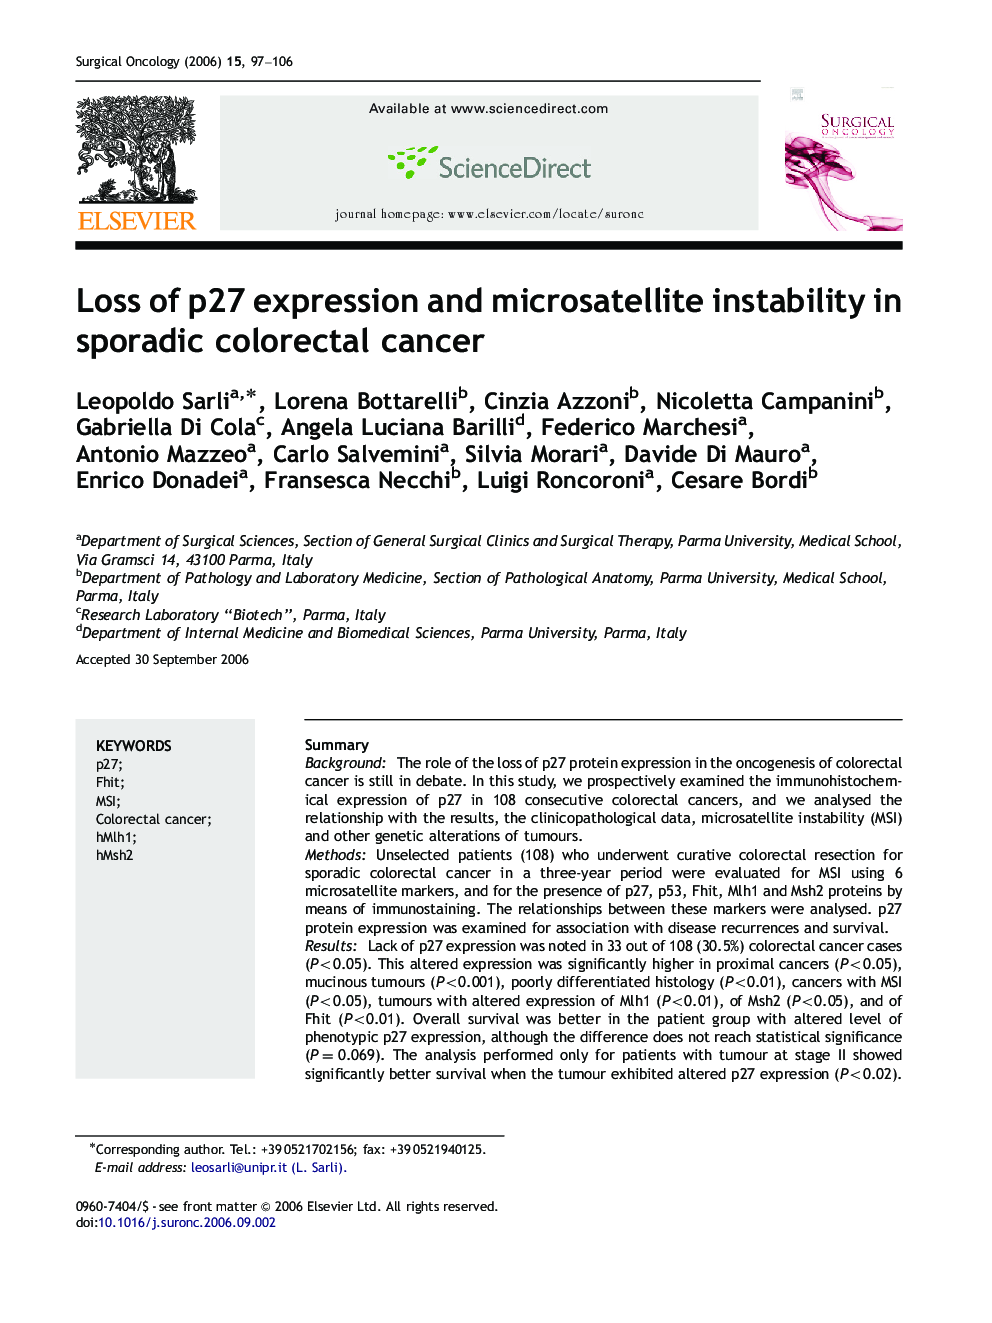 Loss of p27 expression and microsatellite instability in sporadic colorectal cancer